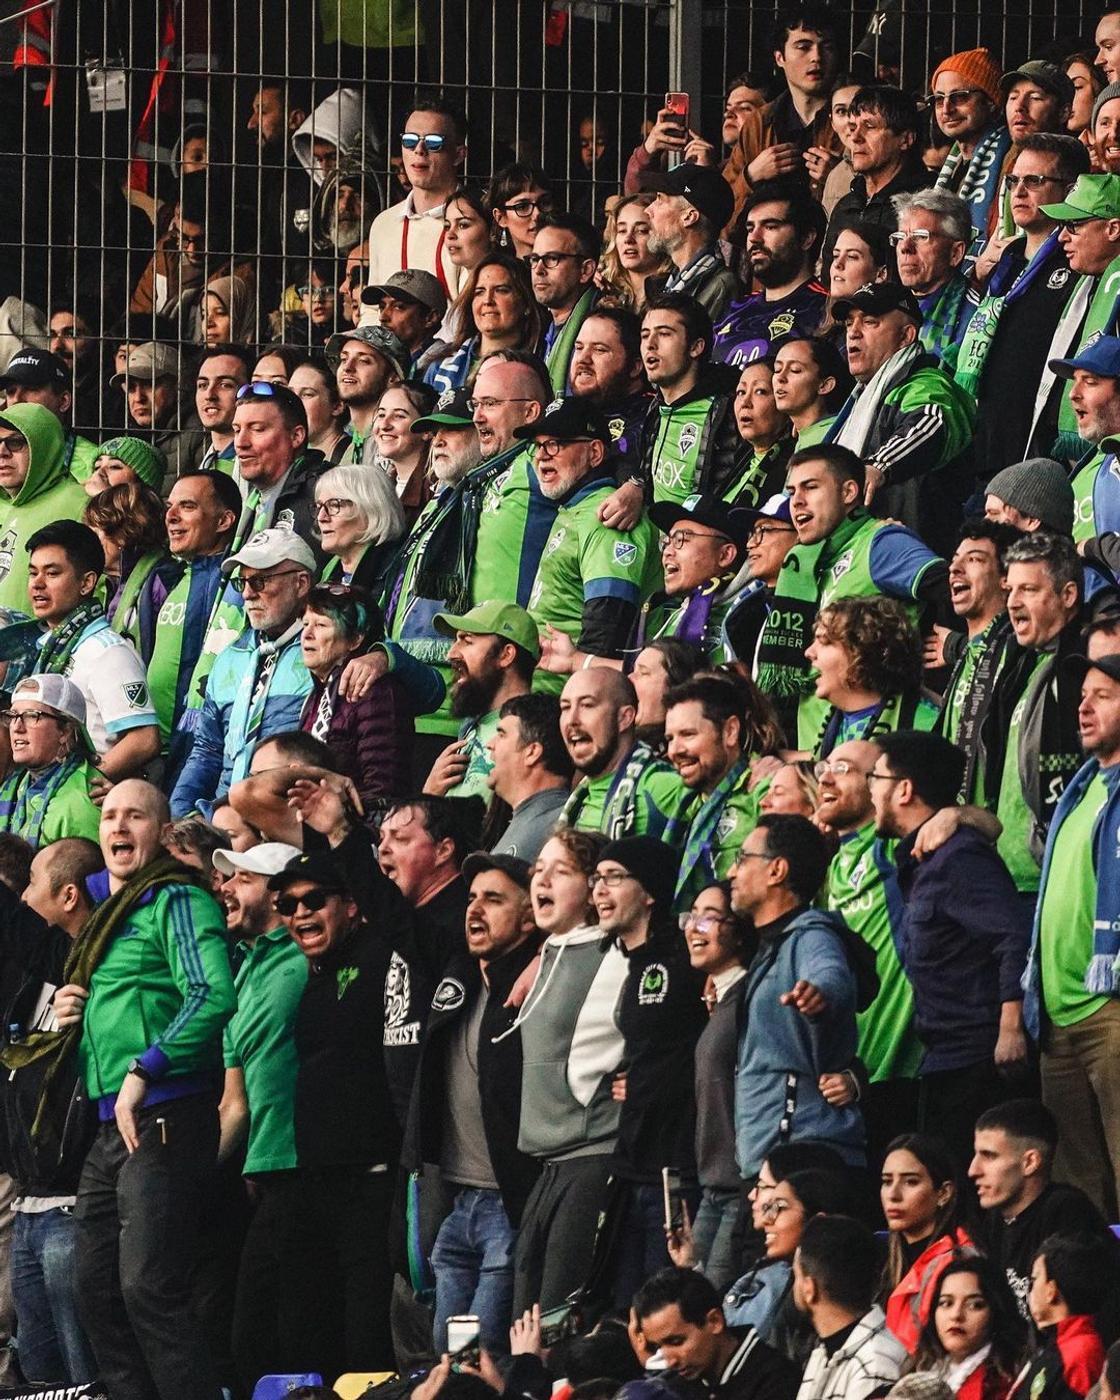 The Best Football Fans in the World: Top 25 Ranking